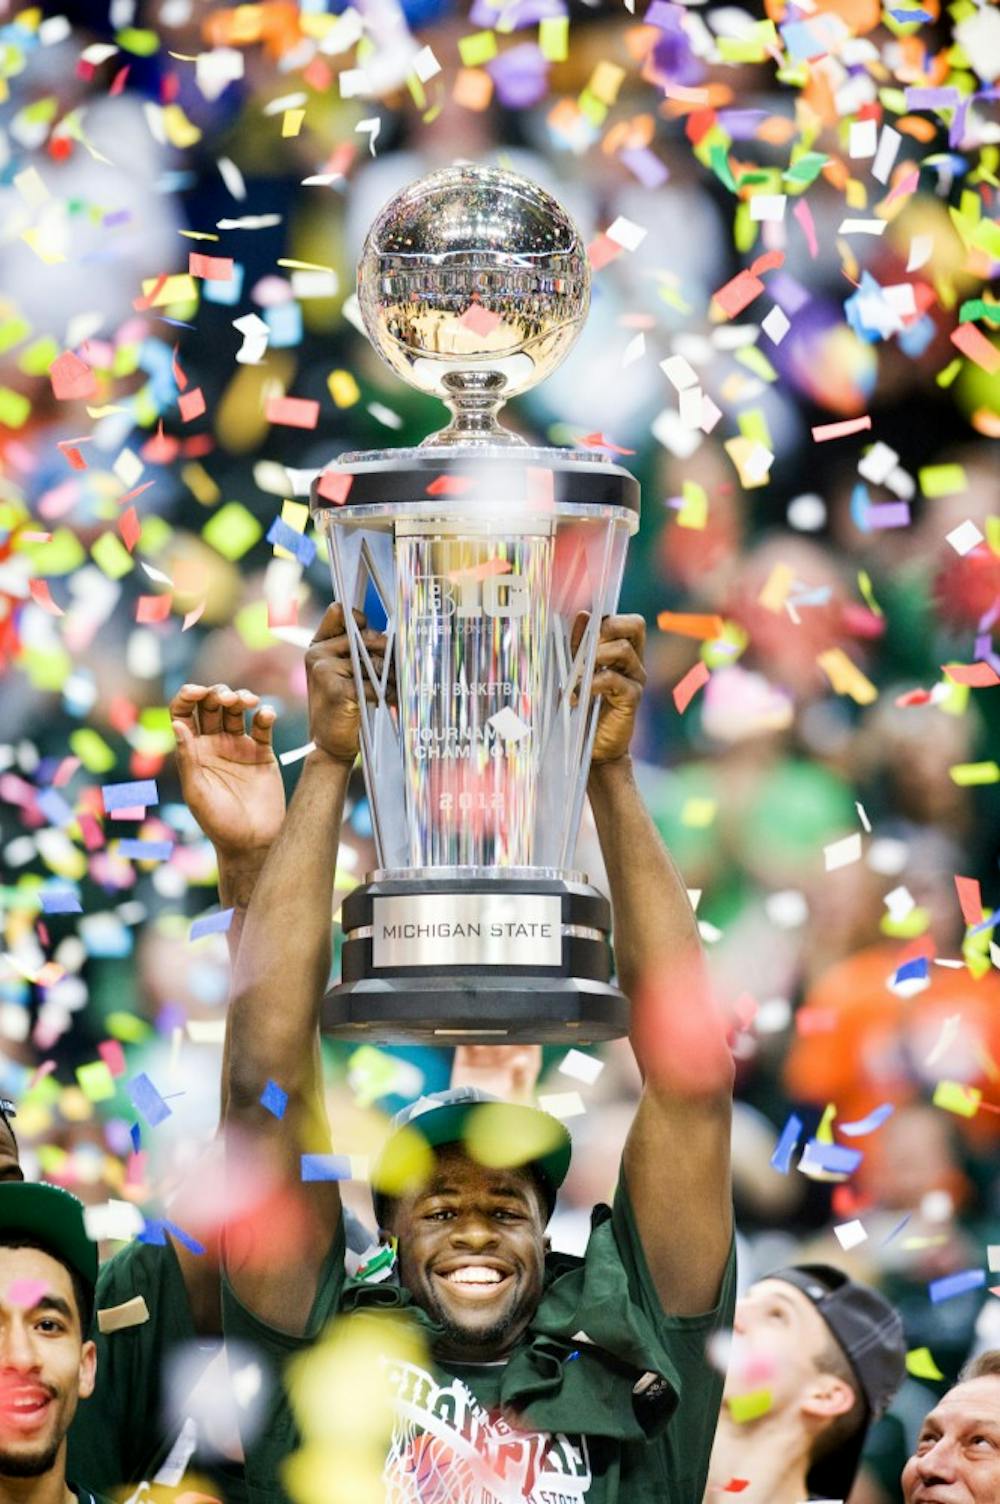 Senior forward Draymond Green hands the Big Ten Tournament championship trophy up after the game against Ohio State. The Michigan State Spartans win their first Big Ten Tournament in 12 years by defeating the Ohio State Buckeyes, 68-64, Sunday afternoon at Bankers Life Fieldhouse in Indianapolis. Justin Wan/The State News